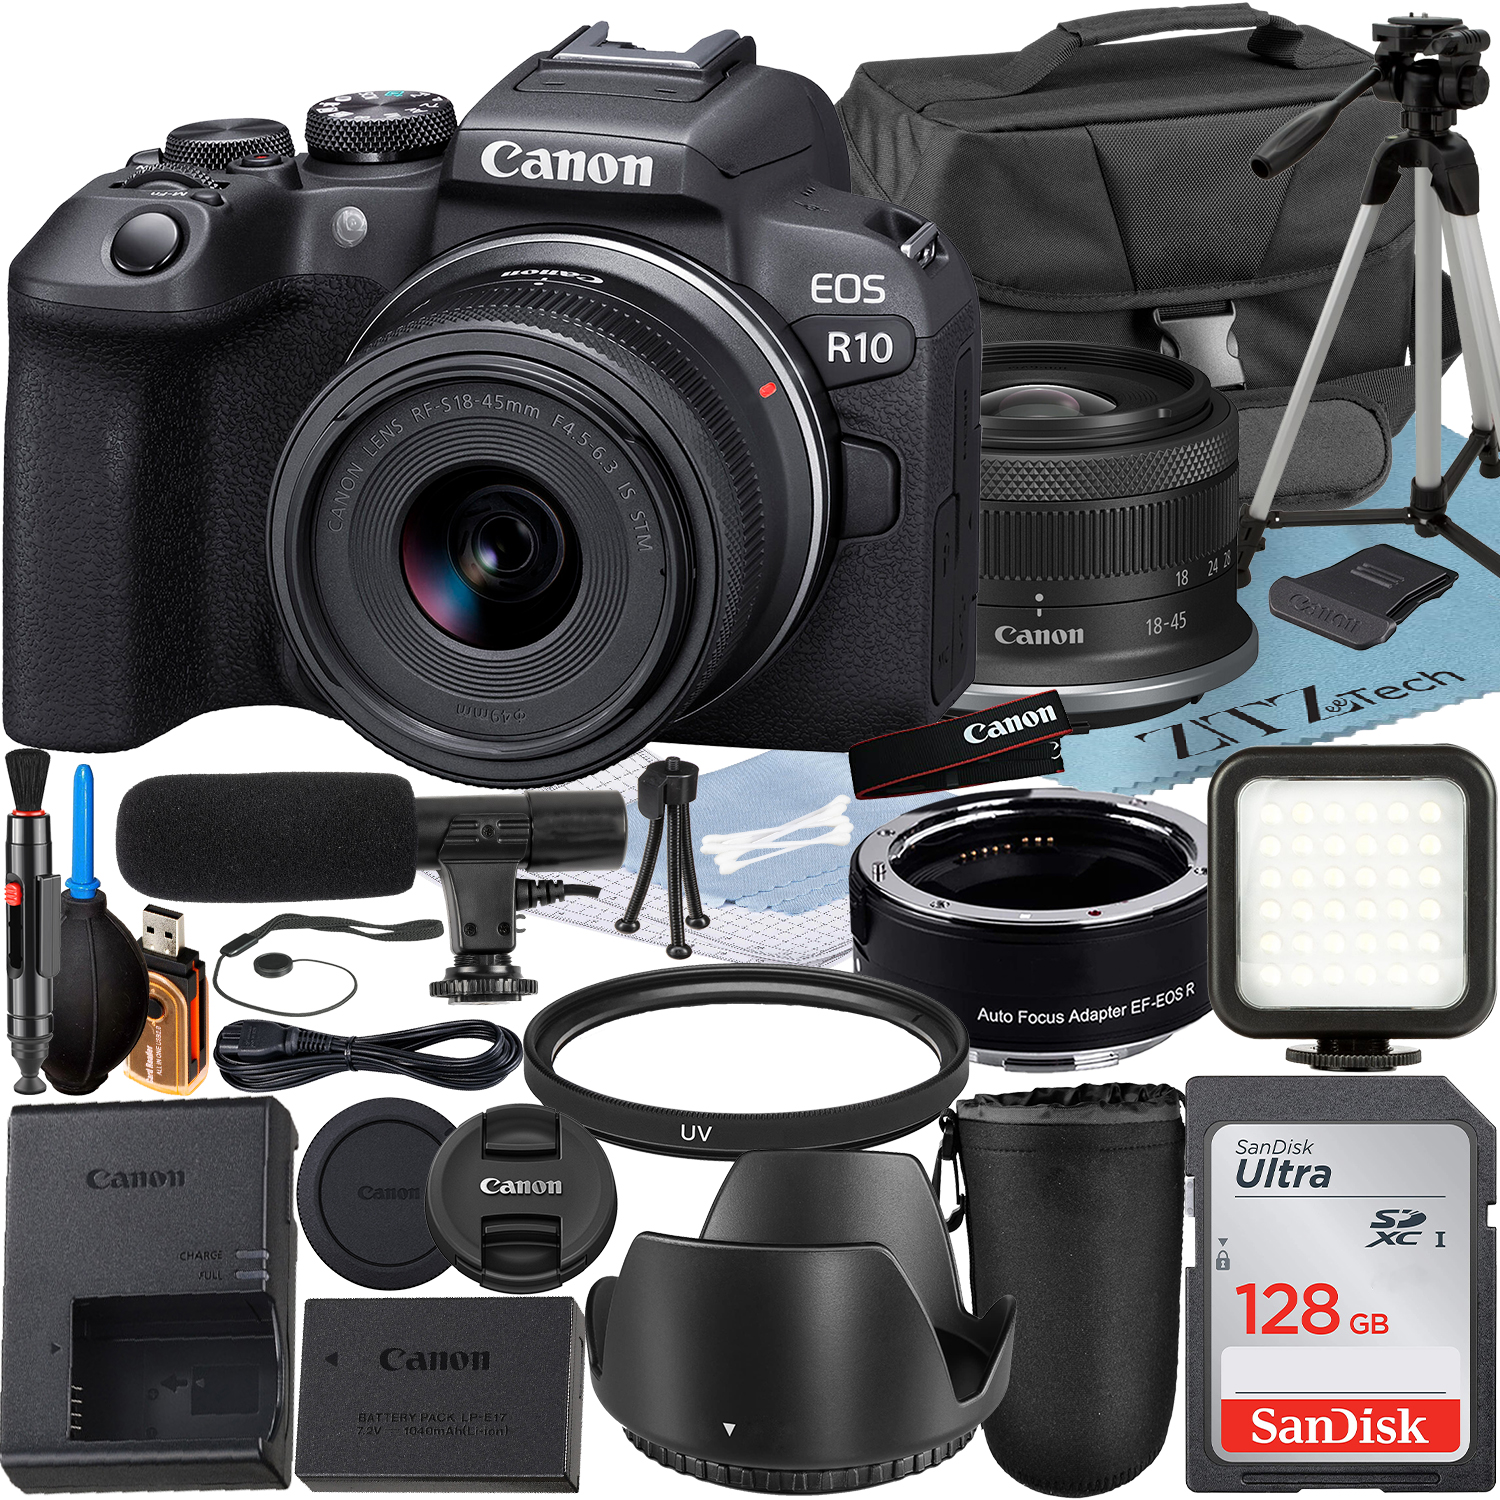 Canon EOS R10 Mirrorless Camera with RF-S 18-45mm Lens + Mount Adapter + SanDisk 128GB Memory Card + Case + LED Flash + ZeeTech Accessory Bundle